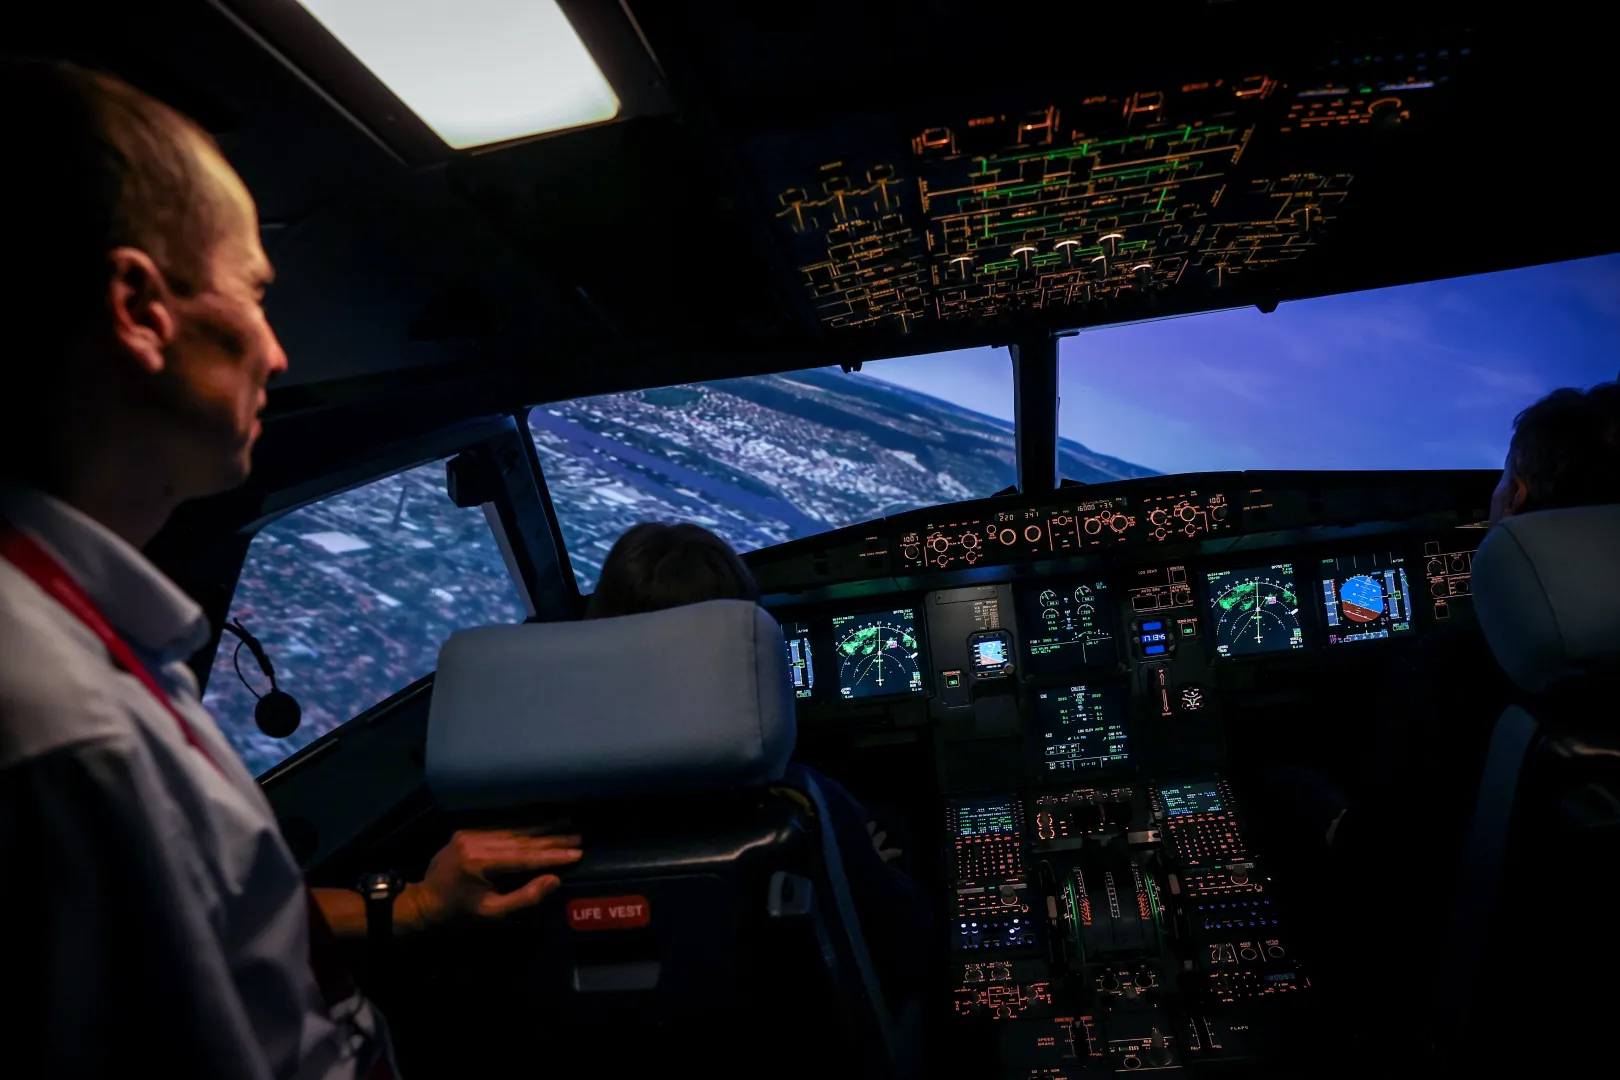 Simulation of an Airbus A320 over Budapest in low resolution - Image: István Huszti / Telex